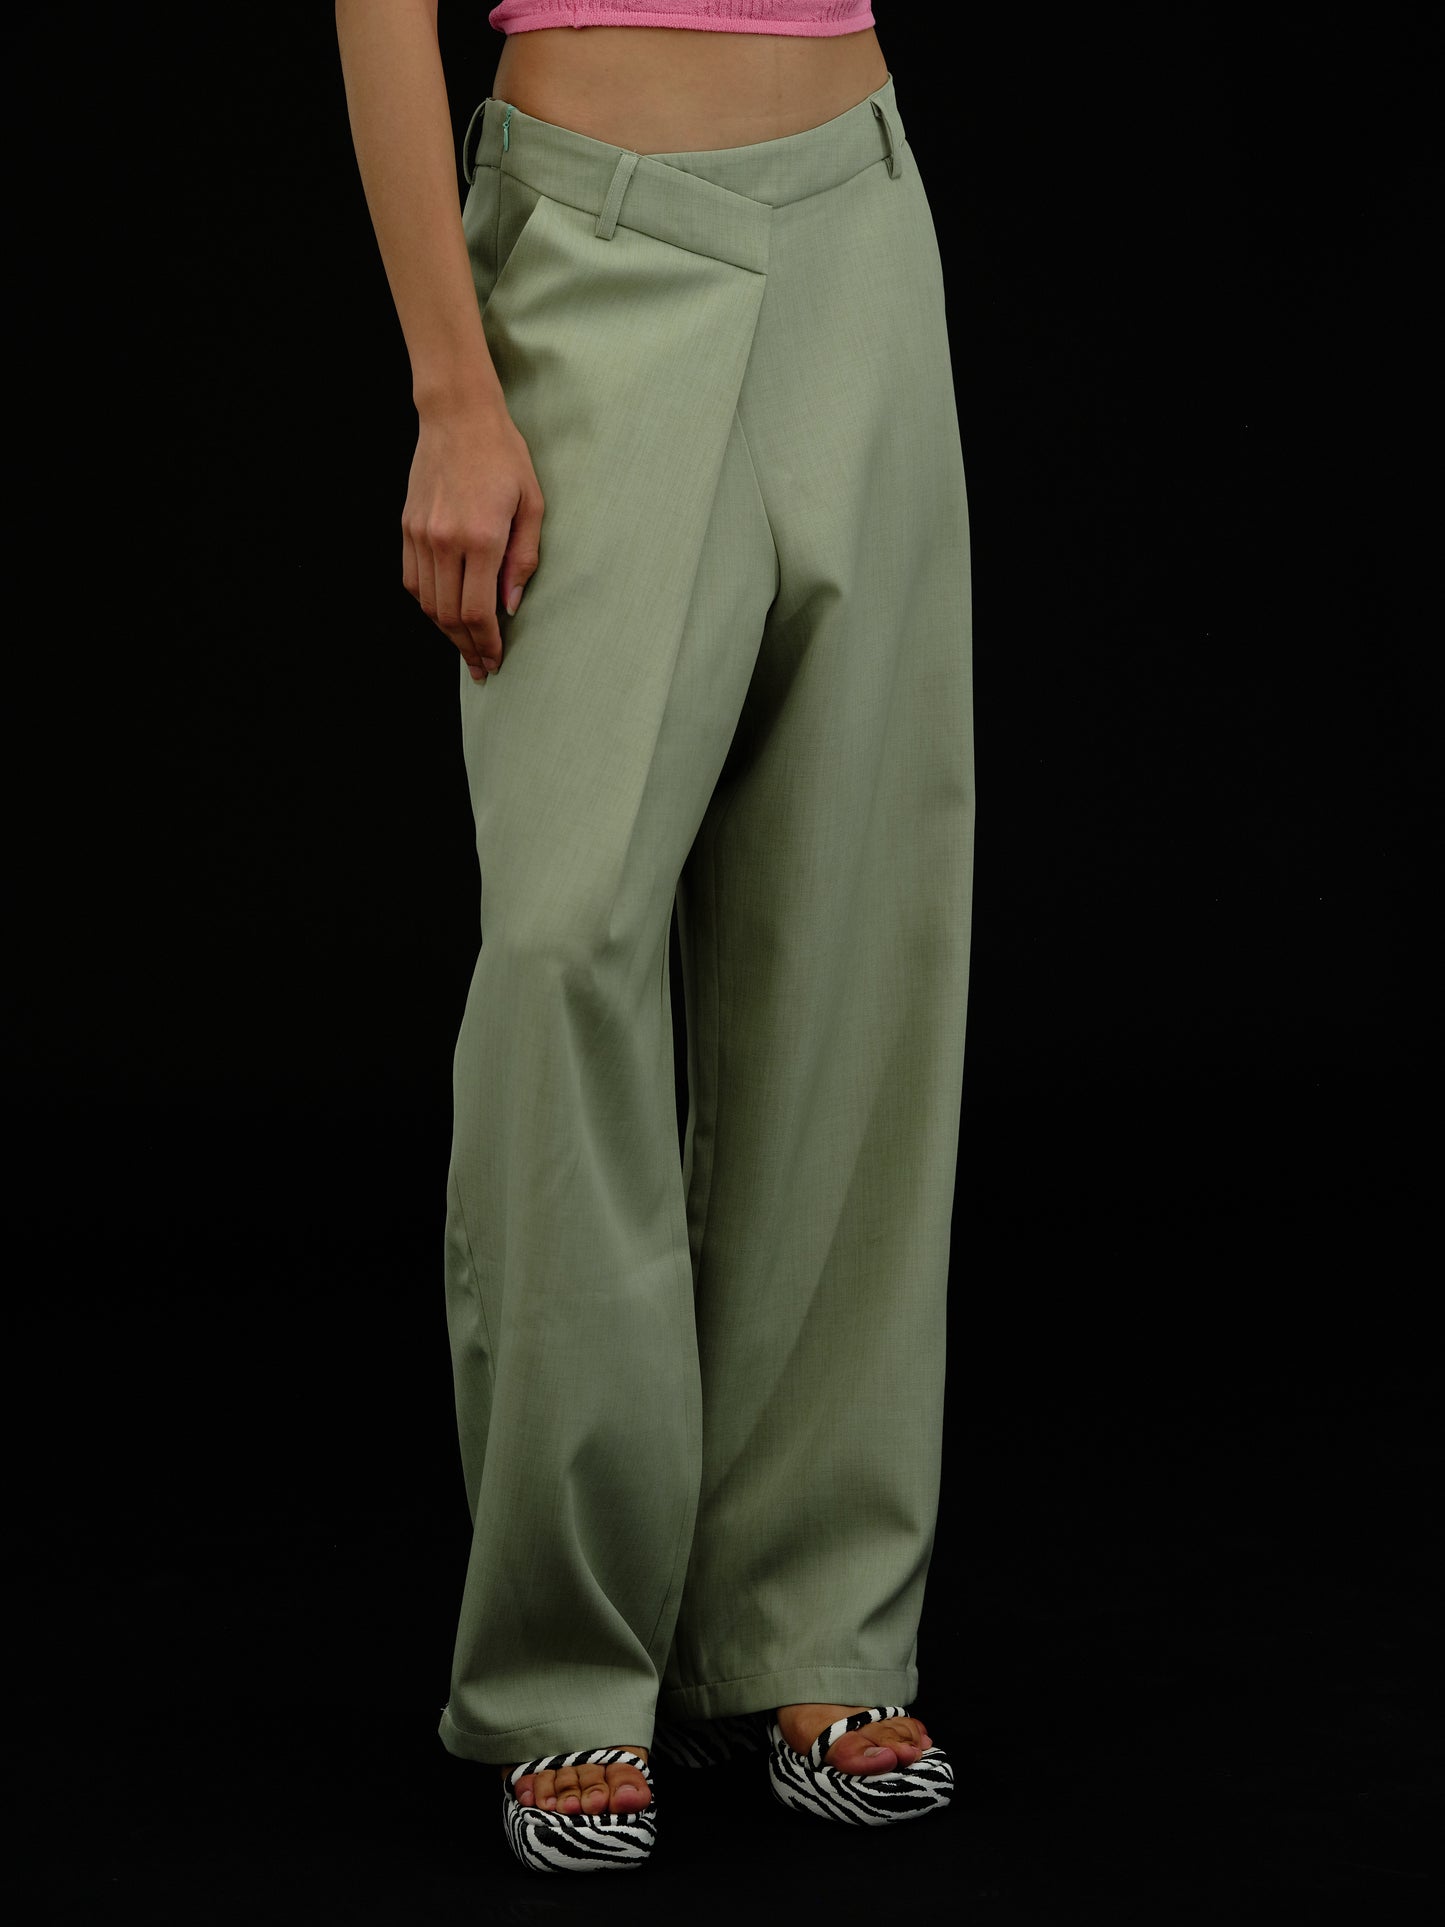 (Limited Stock) Asymmetric Wrap Trousers, Pea Green